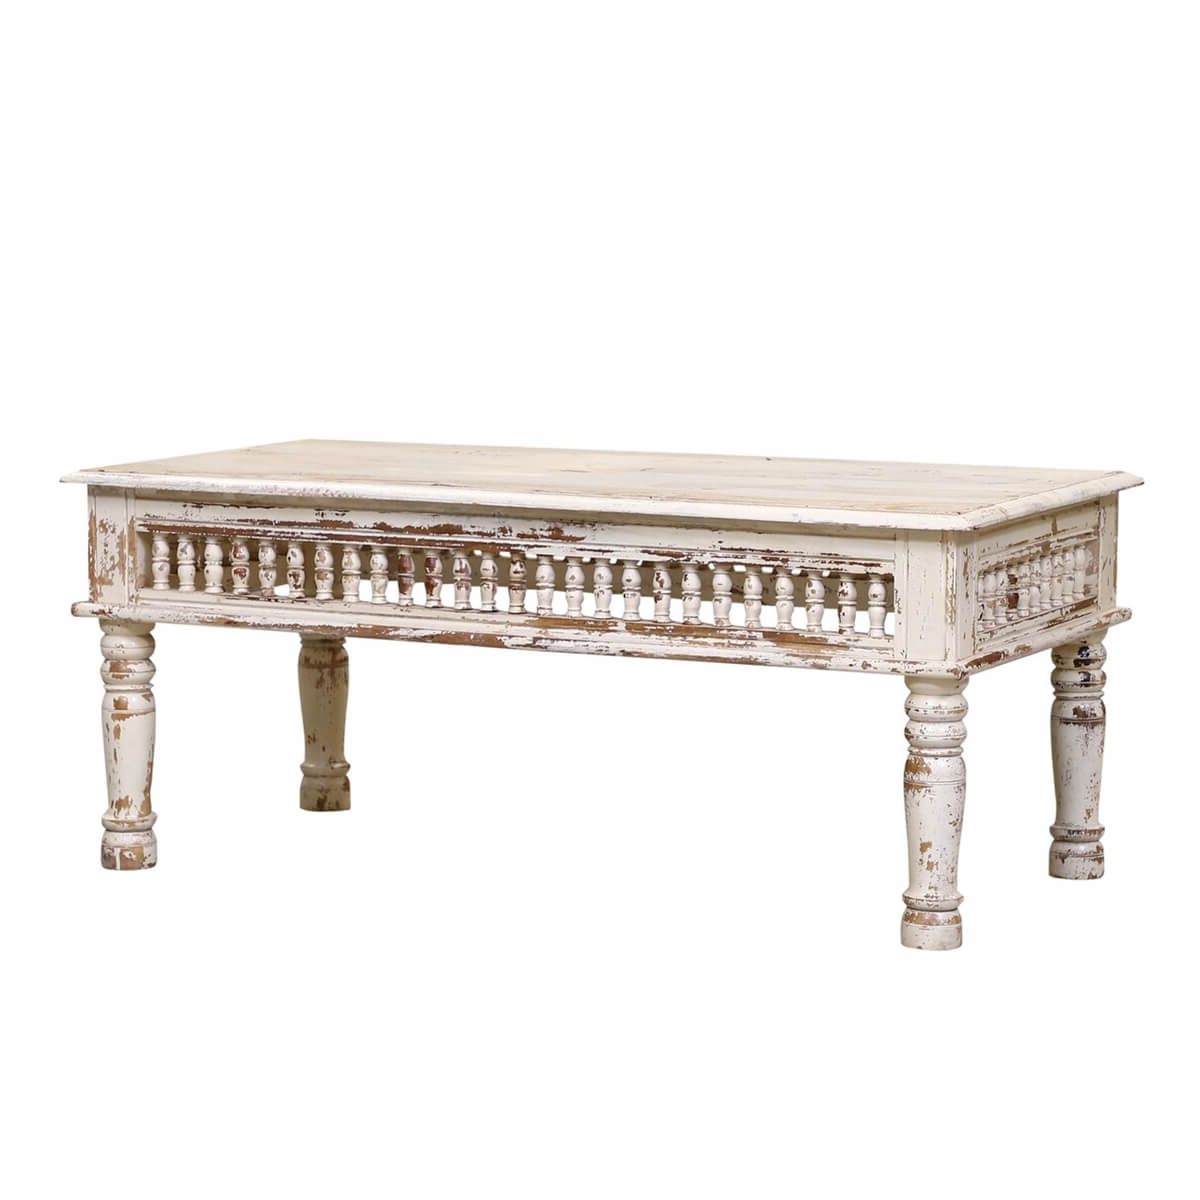 Bowlus White Distressed Reclaimed Wood Railing Rustic Inside Famous Square Weathered White Wood Coffee Tables (View 15 of 20)